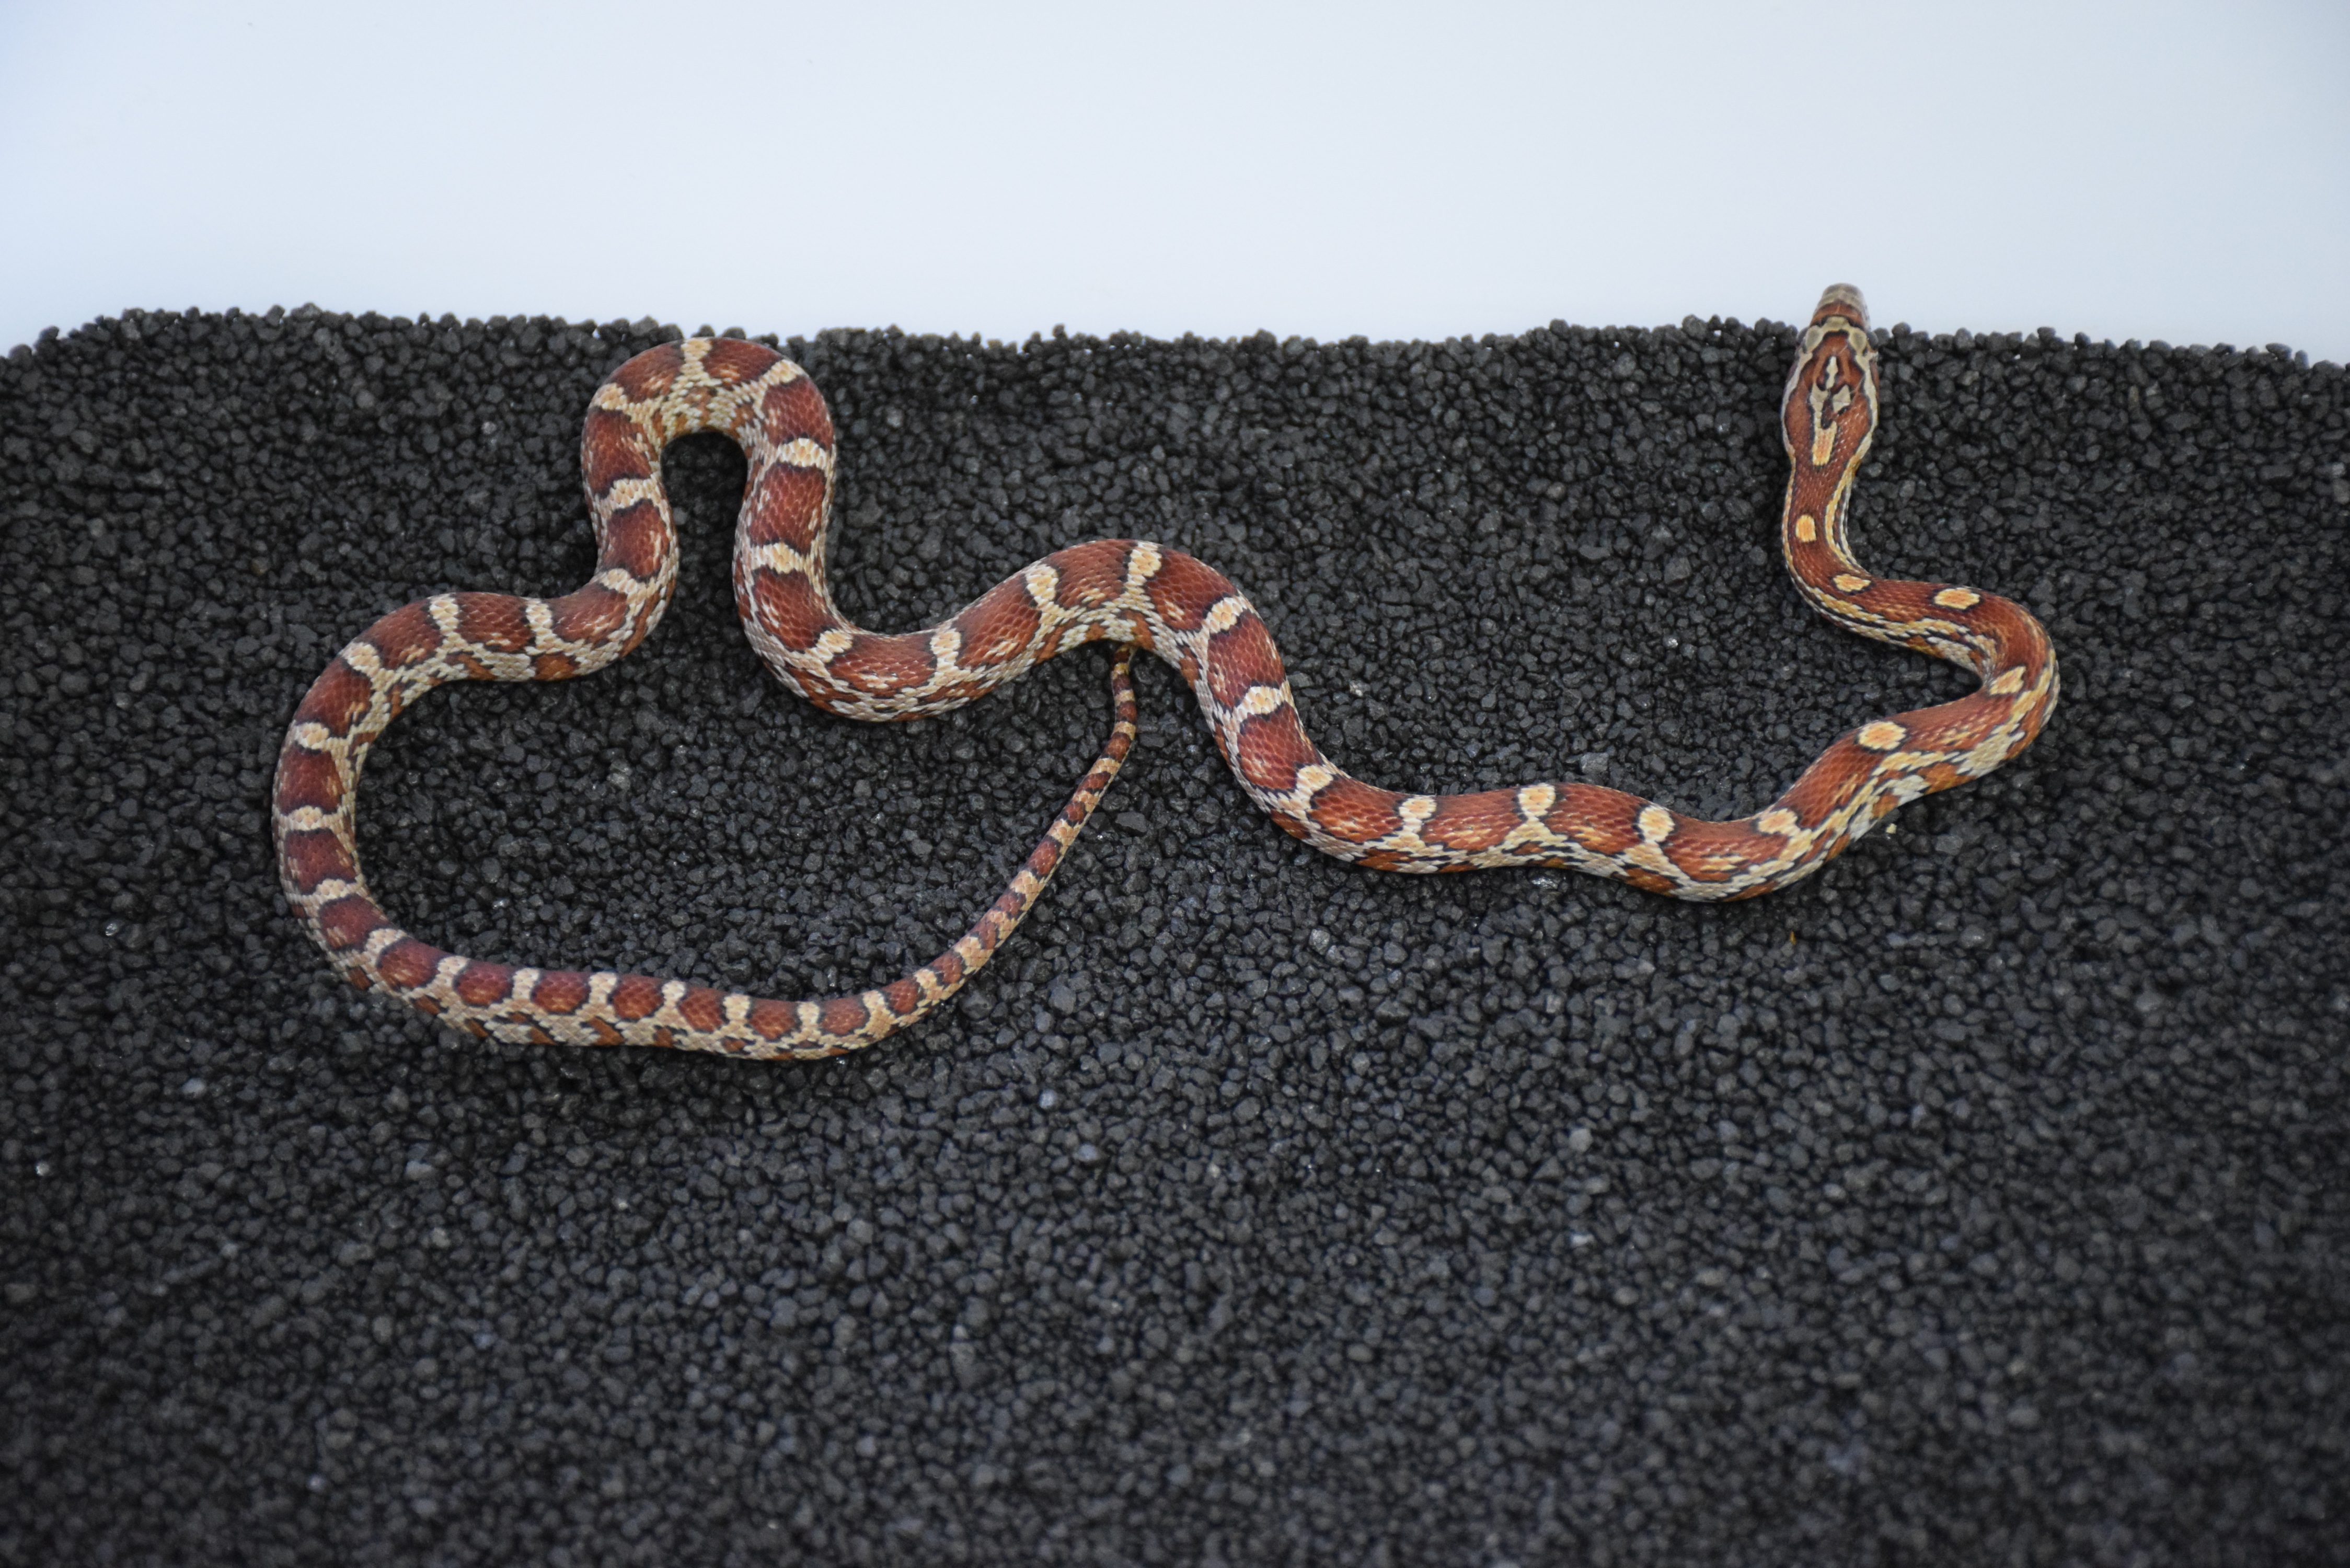 Masque Corn Snake by Cold-Blooded farm